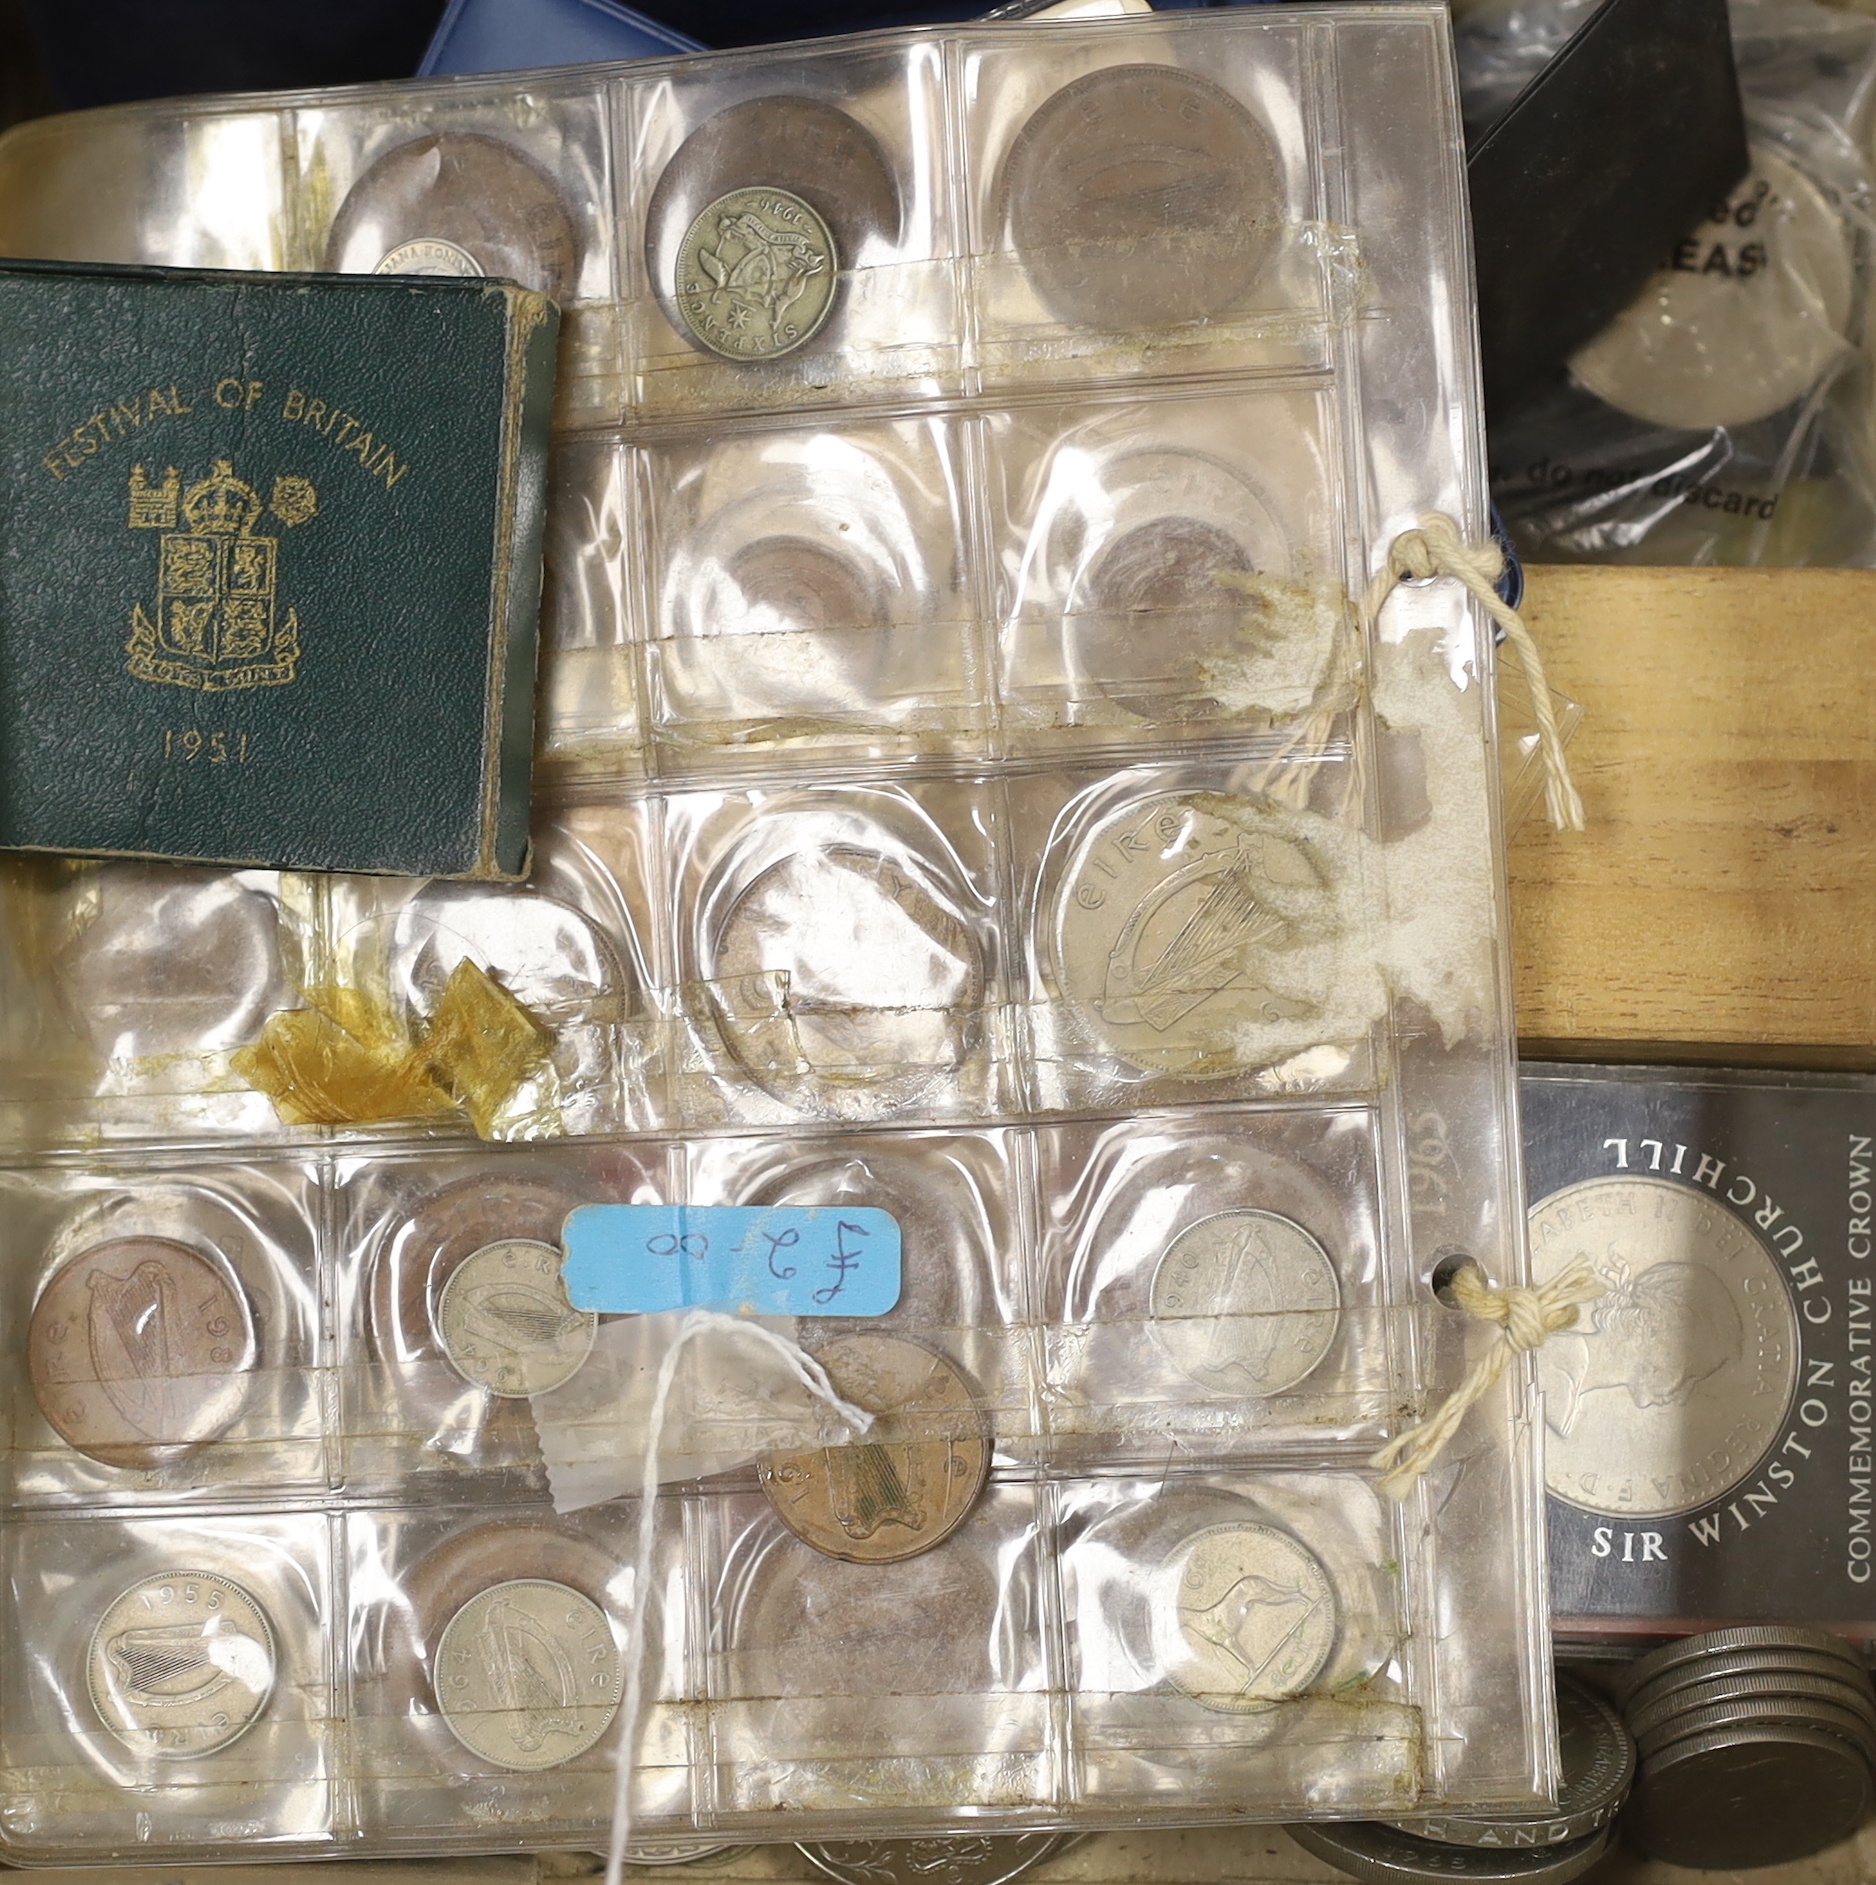 British coins, mostly QEII BUNC Decimal coin sets and commemorative crowns, Festival of Britain